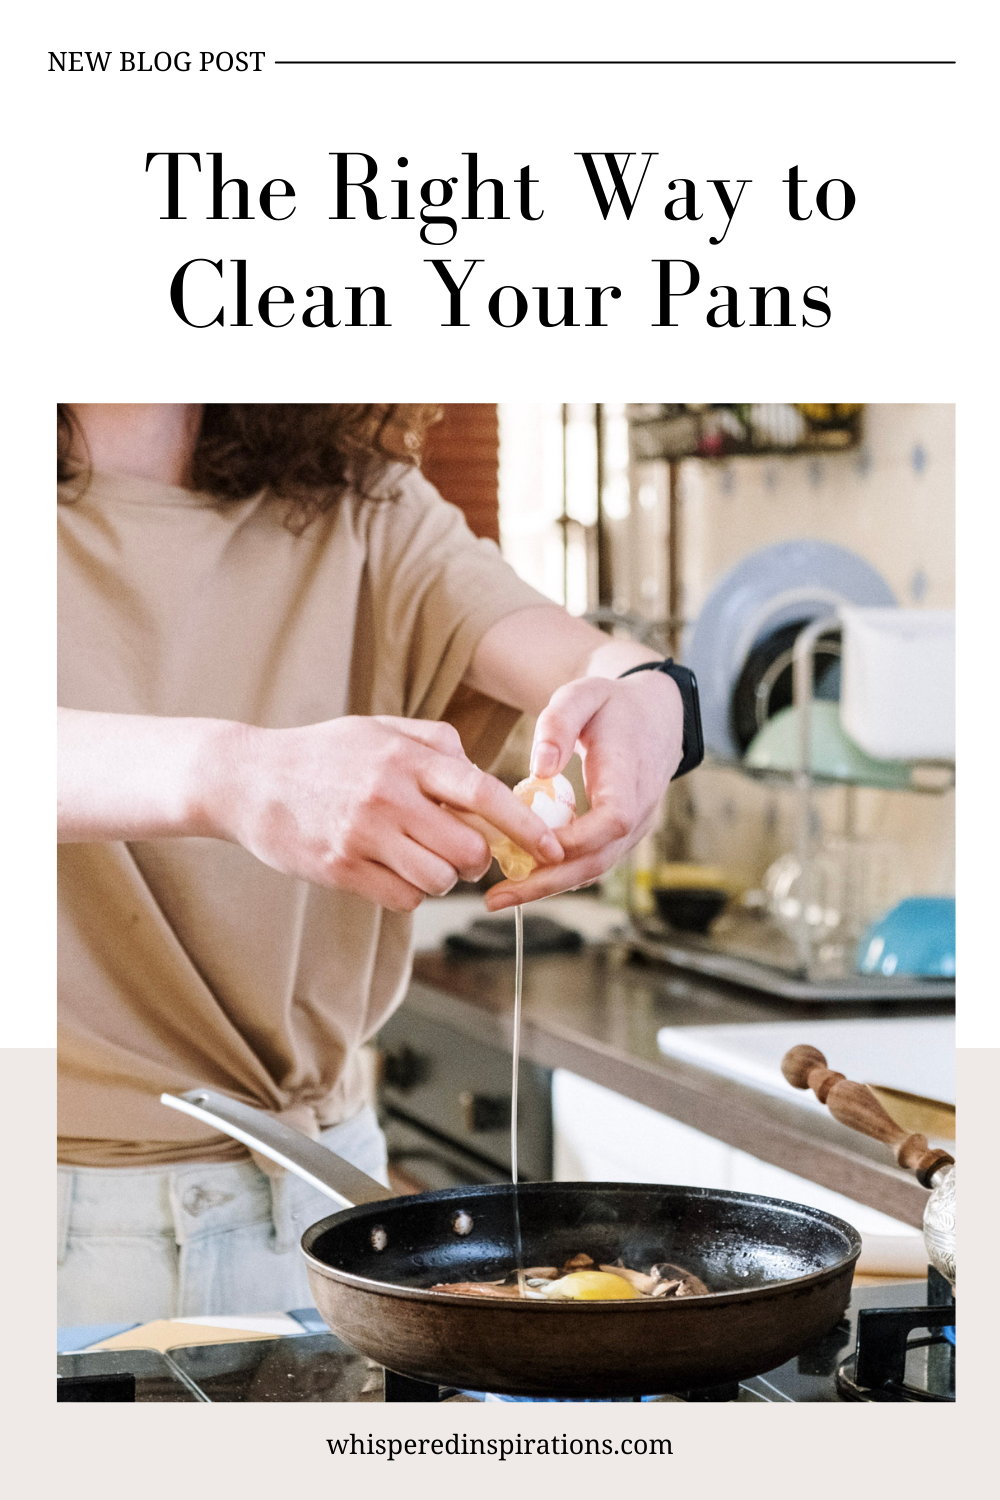 Woman cracks egg over frying pan. This article covers the right way to clean your pans.